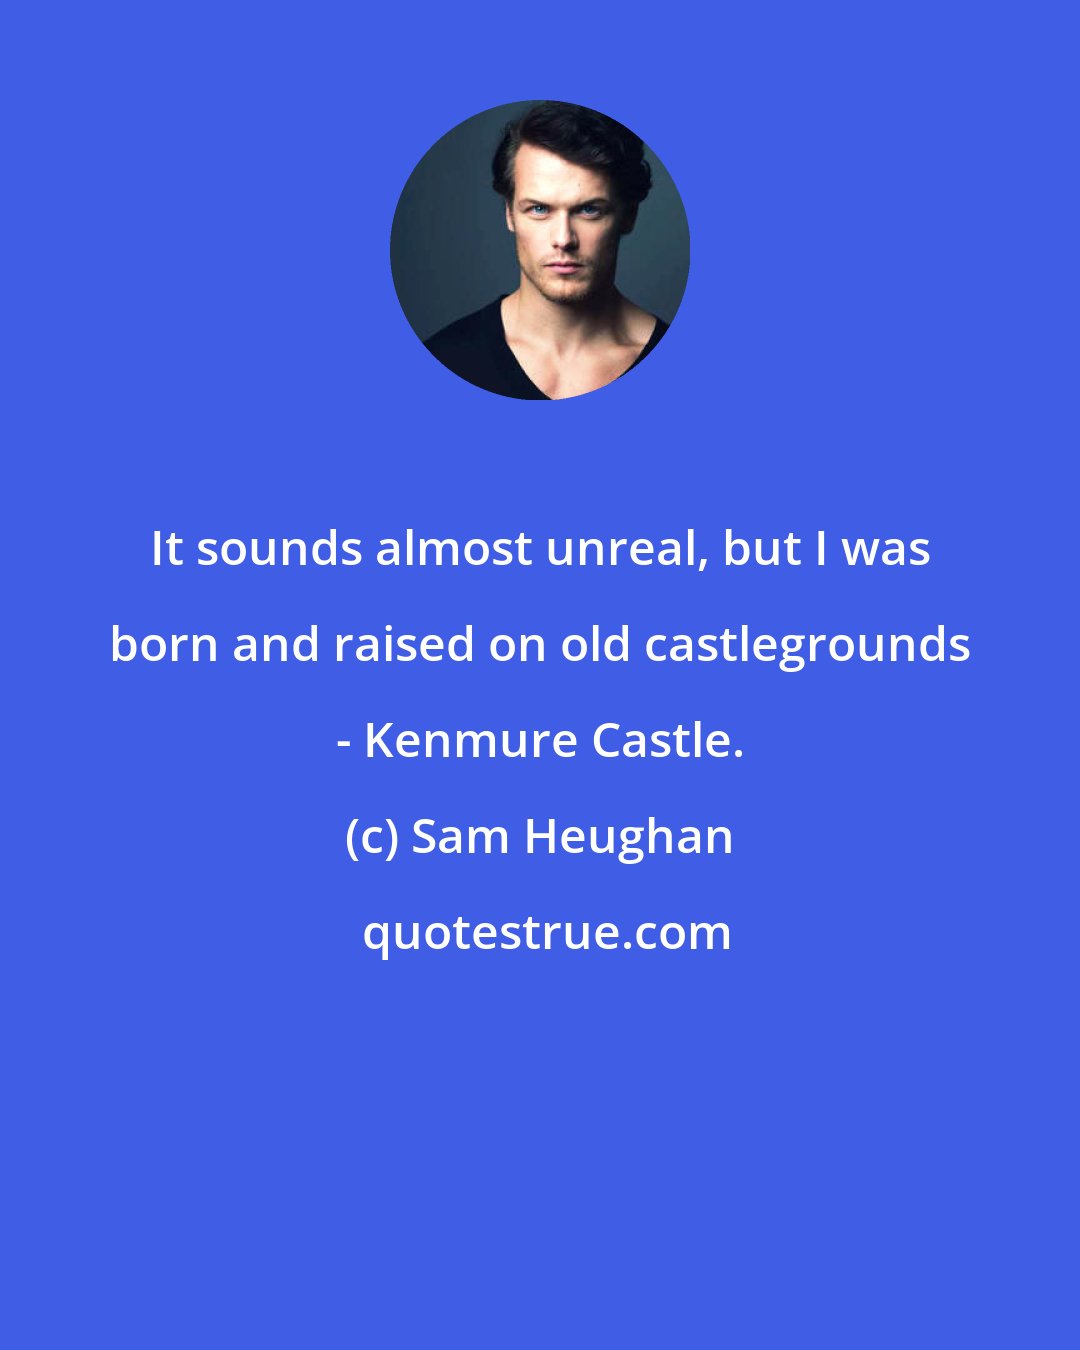 Sam Heughan: It sounds almost unreal, but I was born and raised on old castlegrounds - Kenmure Castle.